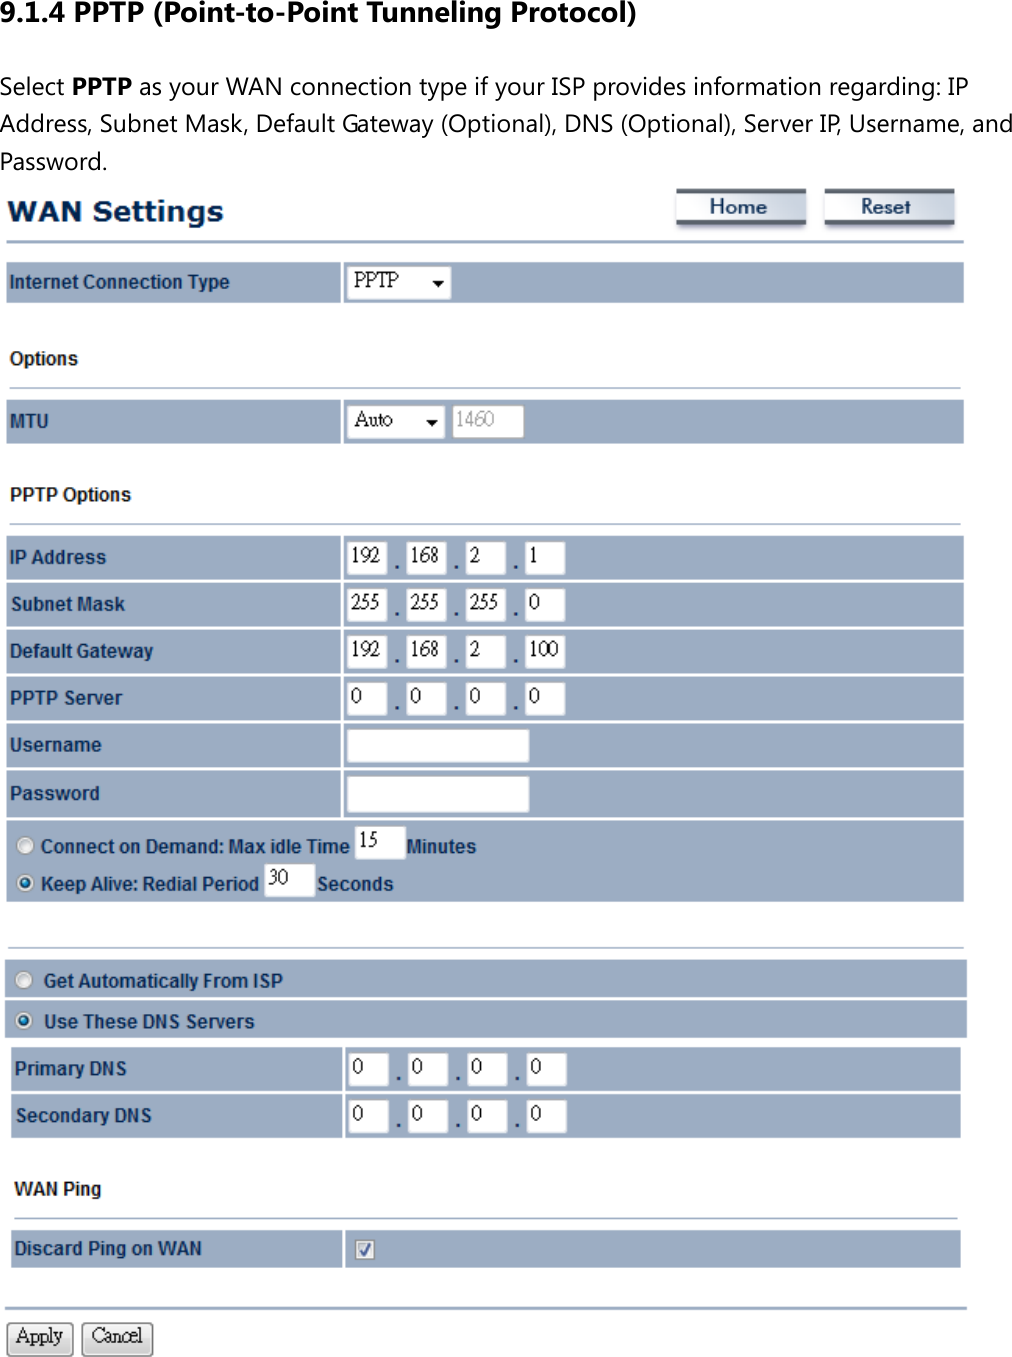 9.1.4 PPTP (Point-to-Point Tunneling Protocol) Select PPTP as your WAN connection type if your ISP provides information regarding: IP Address, Subnet Mask, Default Gateway (Optional), DNS (Optional), Server IP, Username, and Password.     